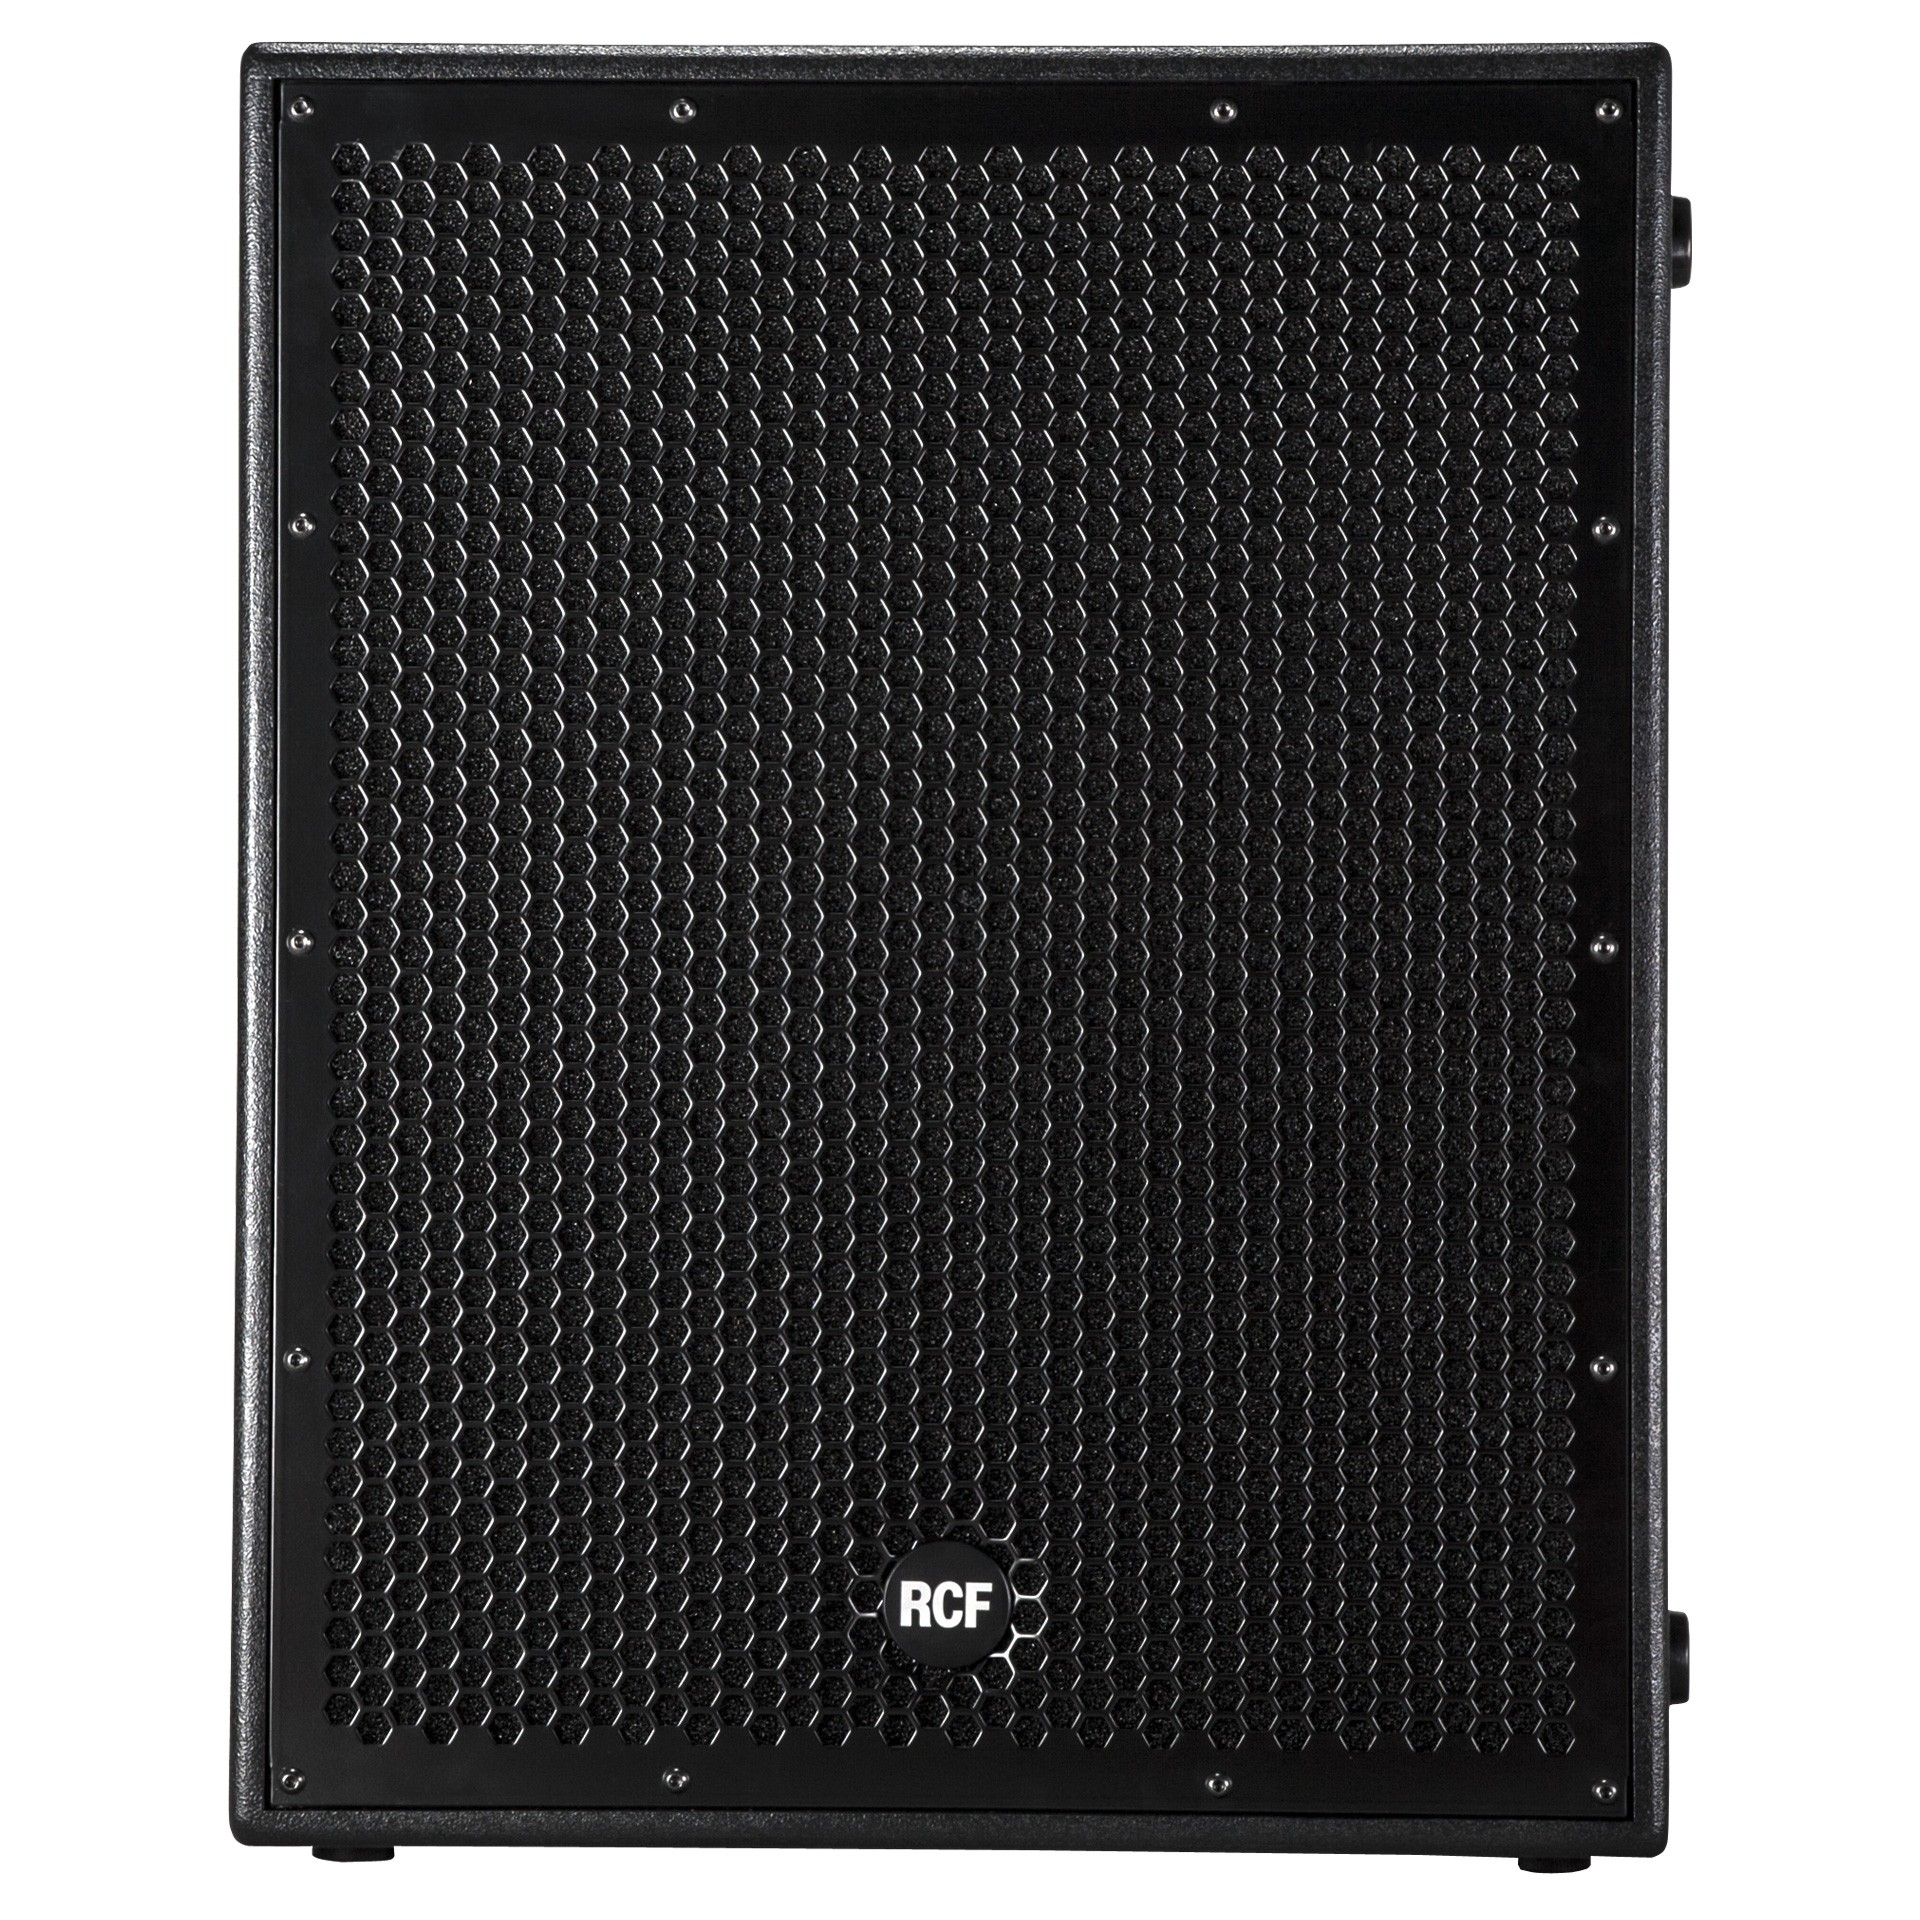 Subwoofere pro - Subwoofer activ RCF SUB 8004-AS, audioclub.ro